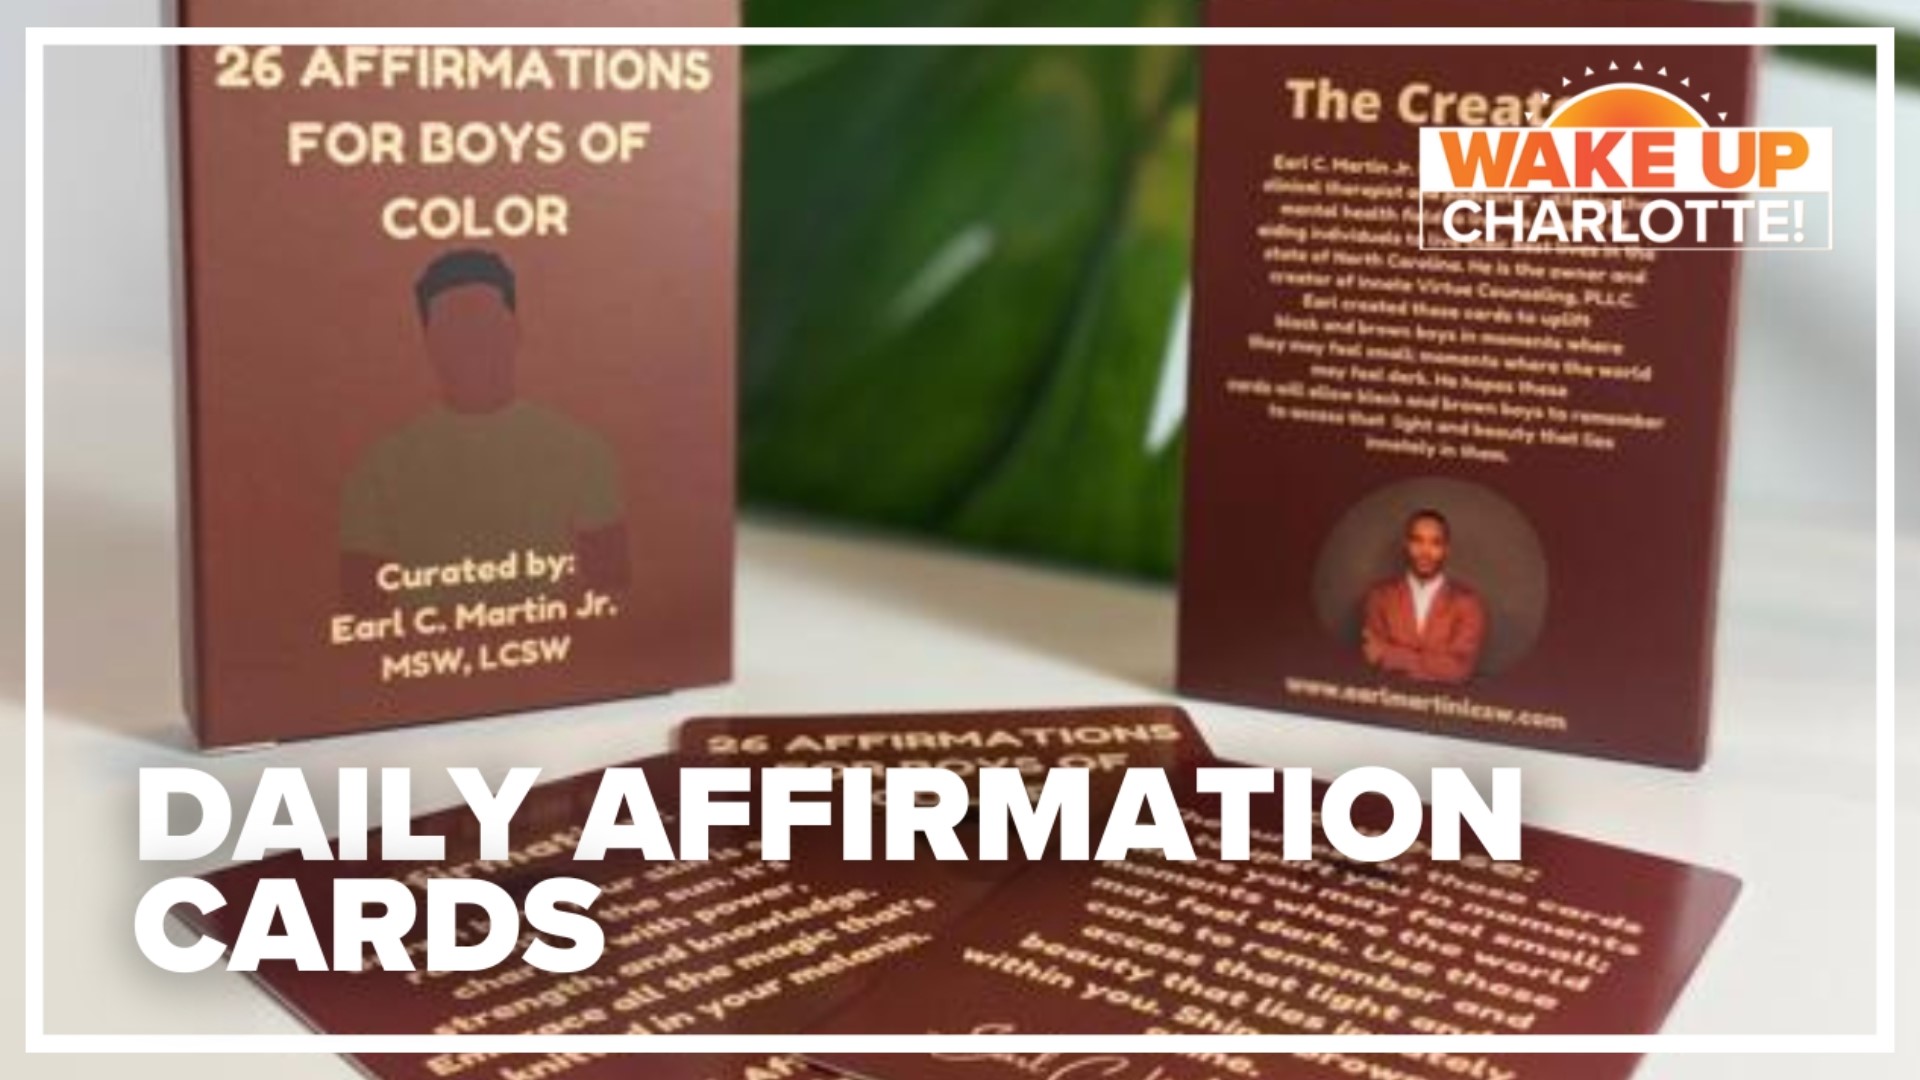 Earl C. Martin Jr. said the purpose of these cards are to uplift Black and Brown boys in moments when they feel small.